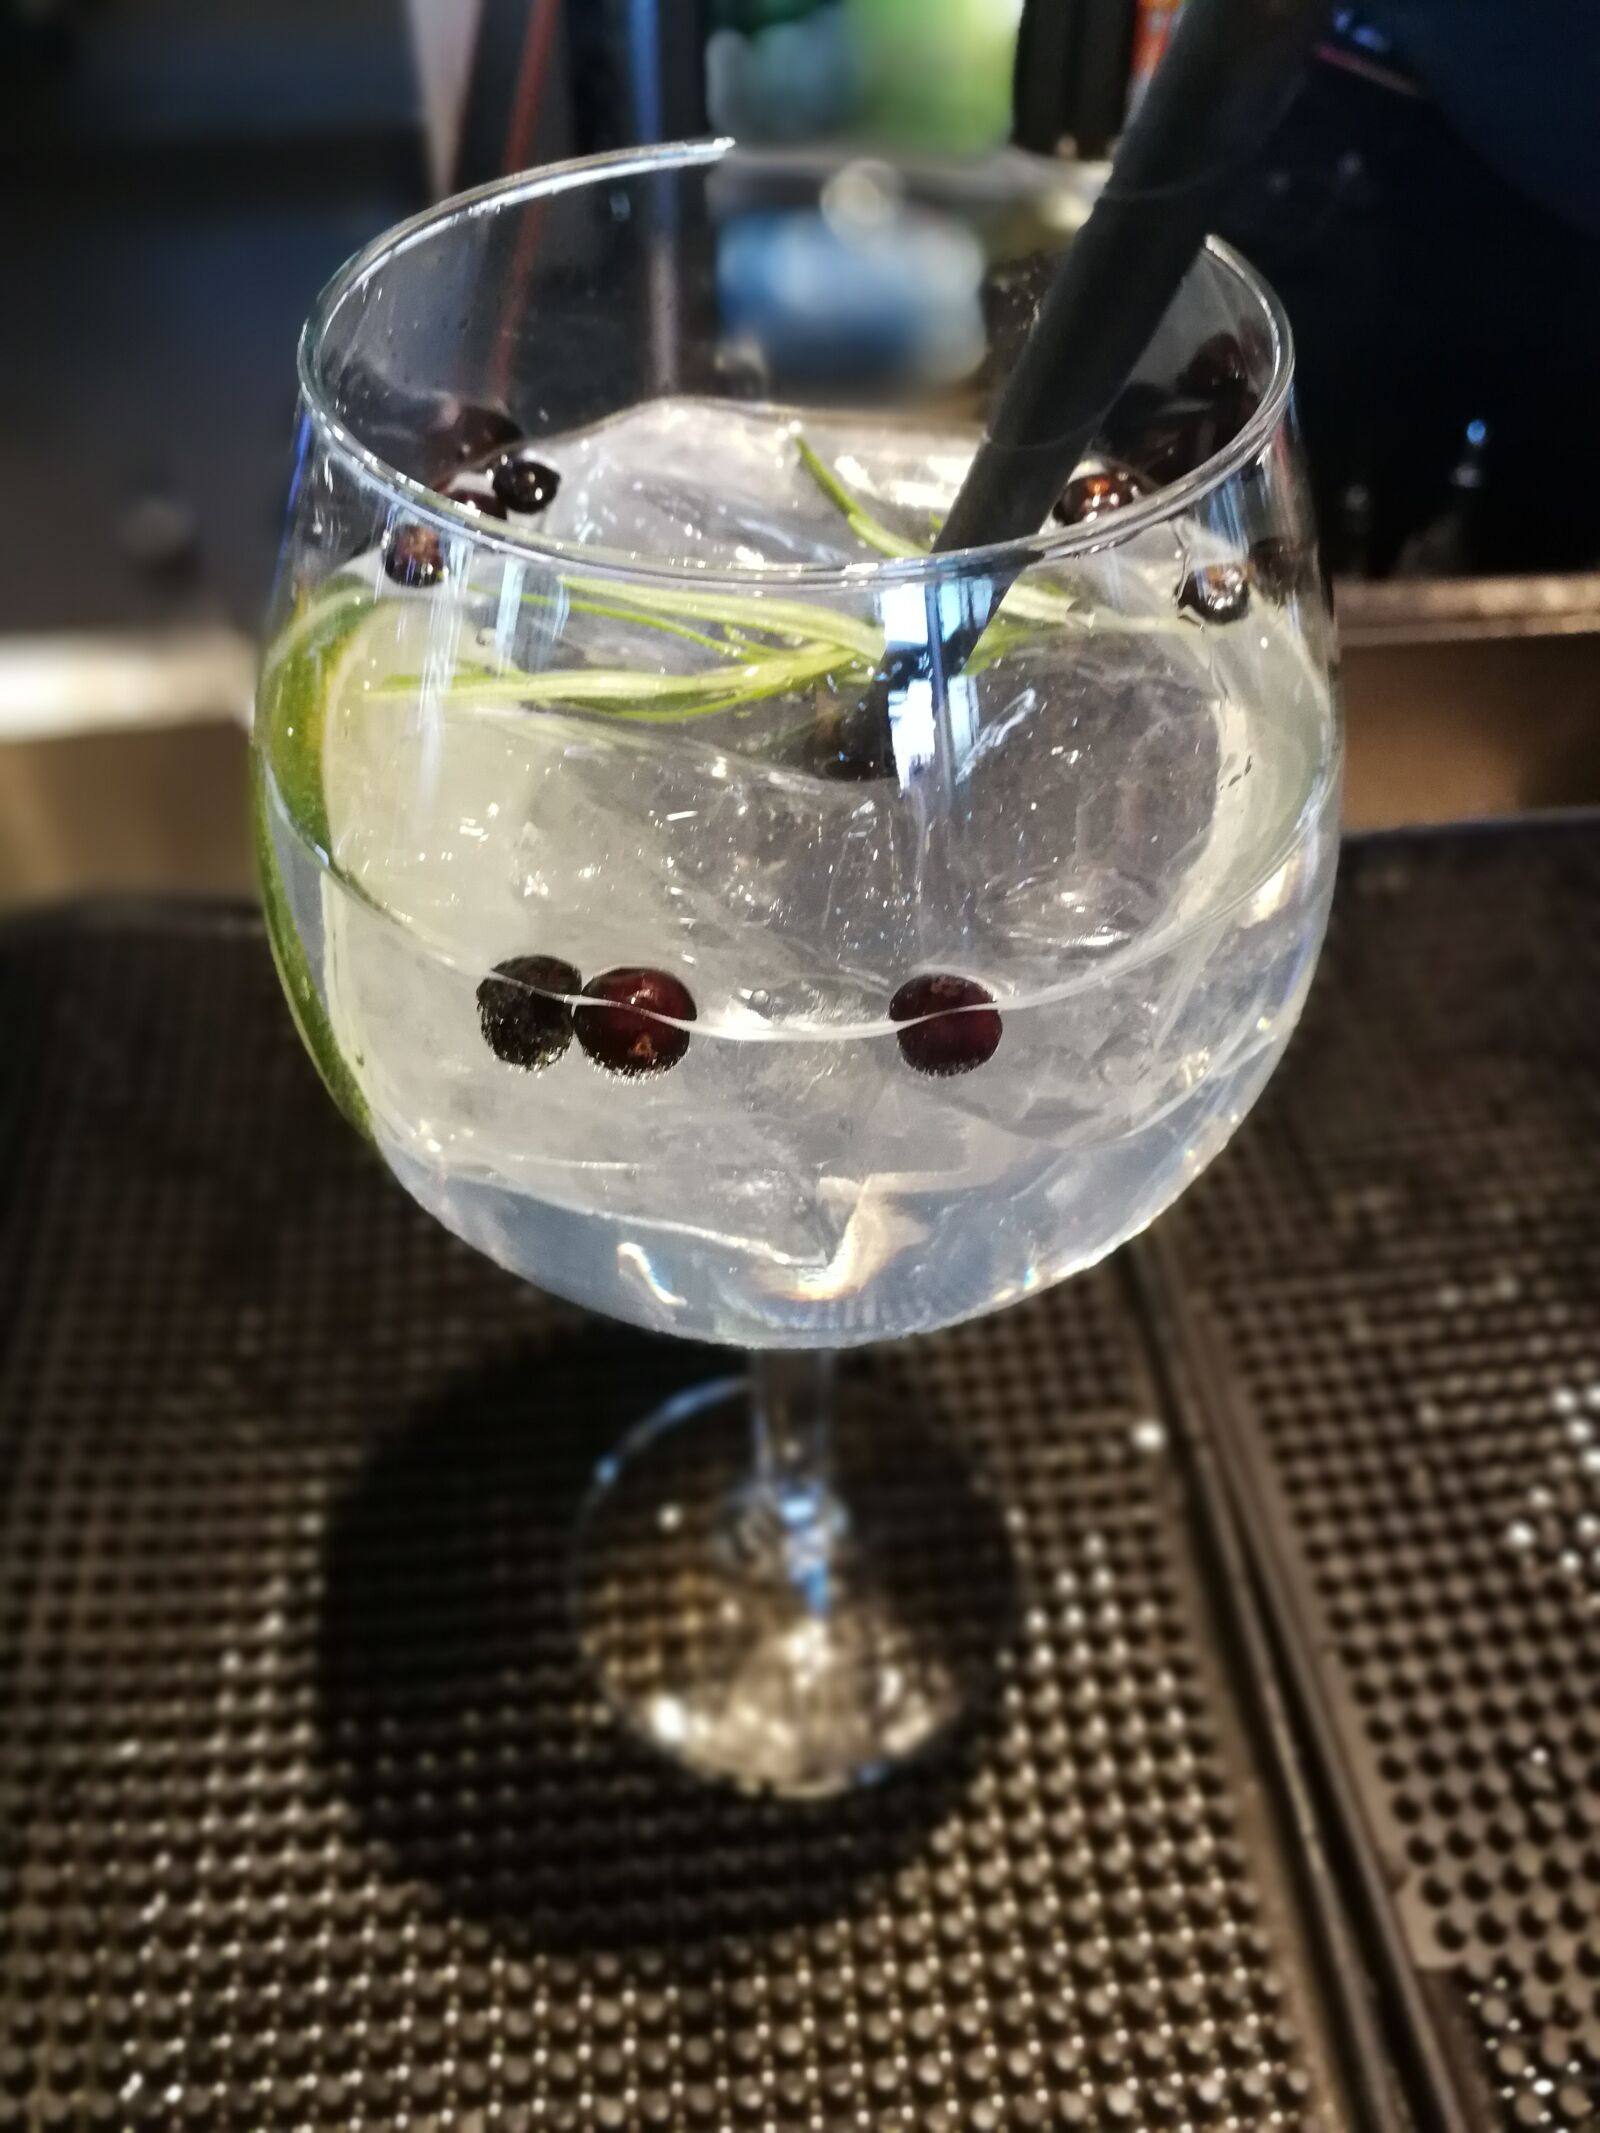 HUAWEI P10 sample photo. Gin and tonic, gb photography